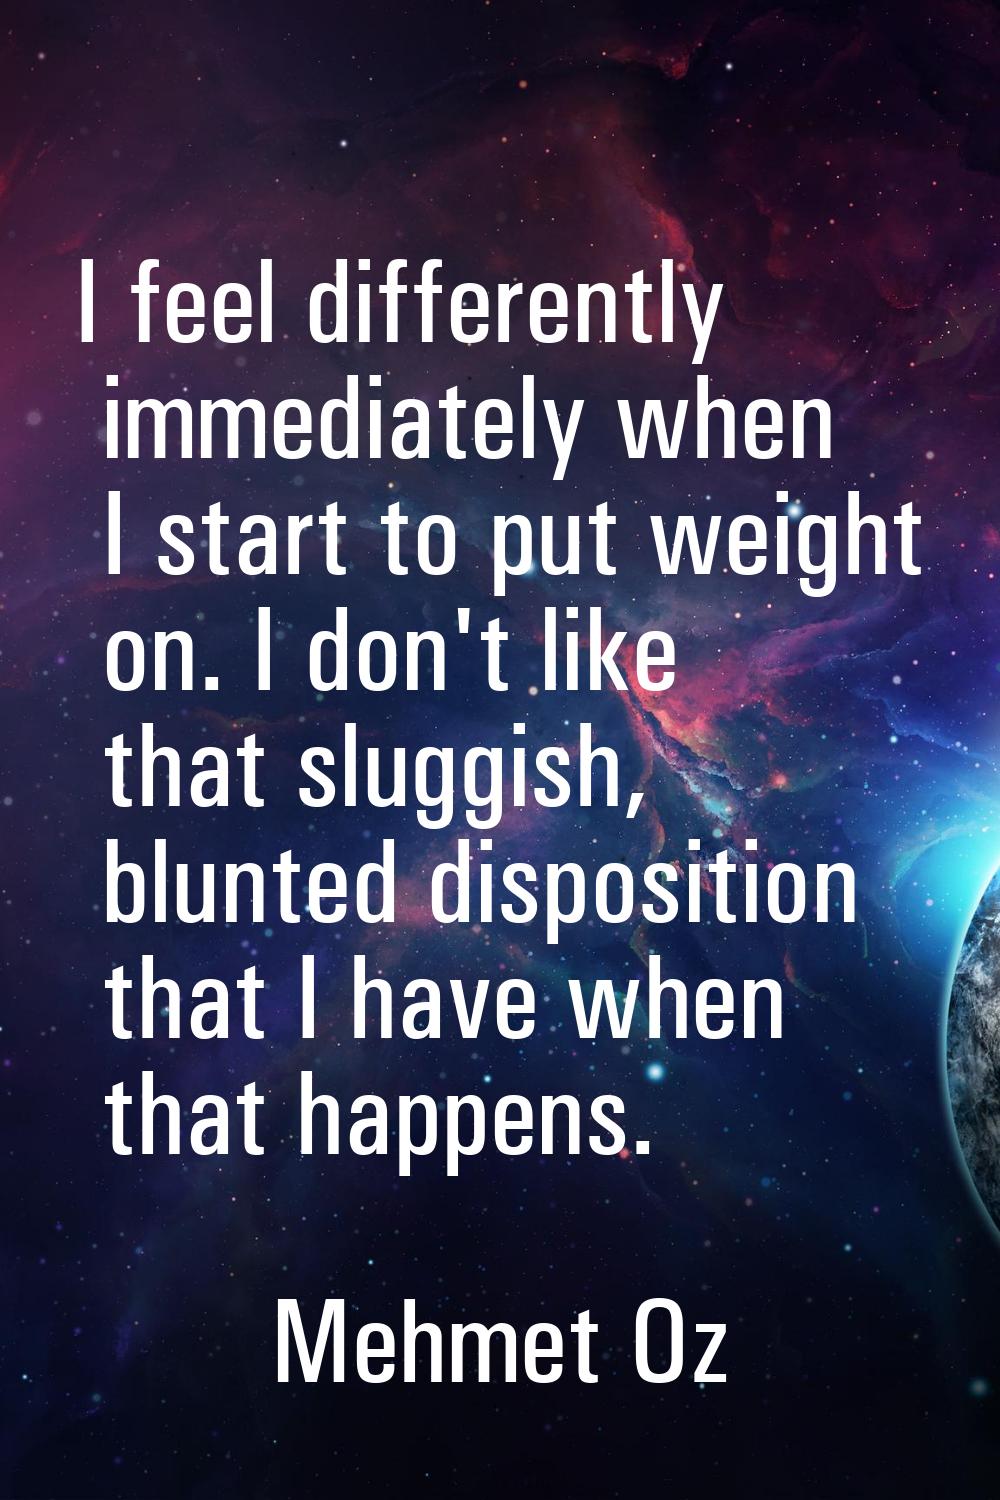 I feel differently immediately when I start to put weight on. I don't like that sluggish, blunted d